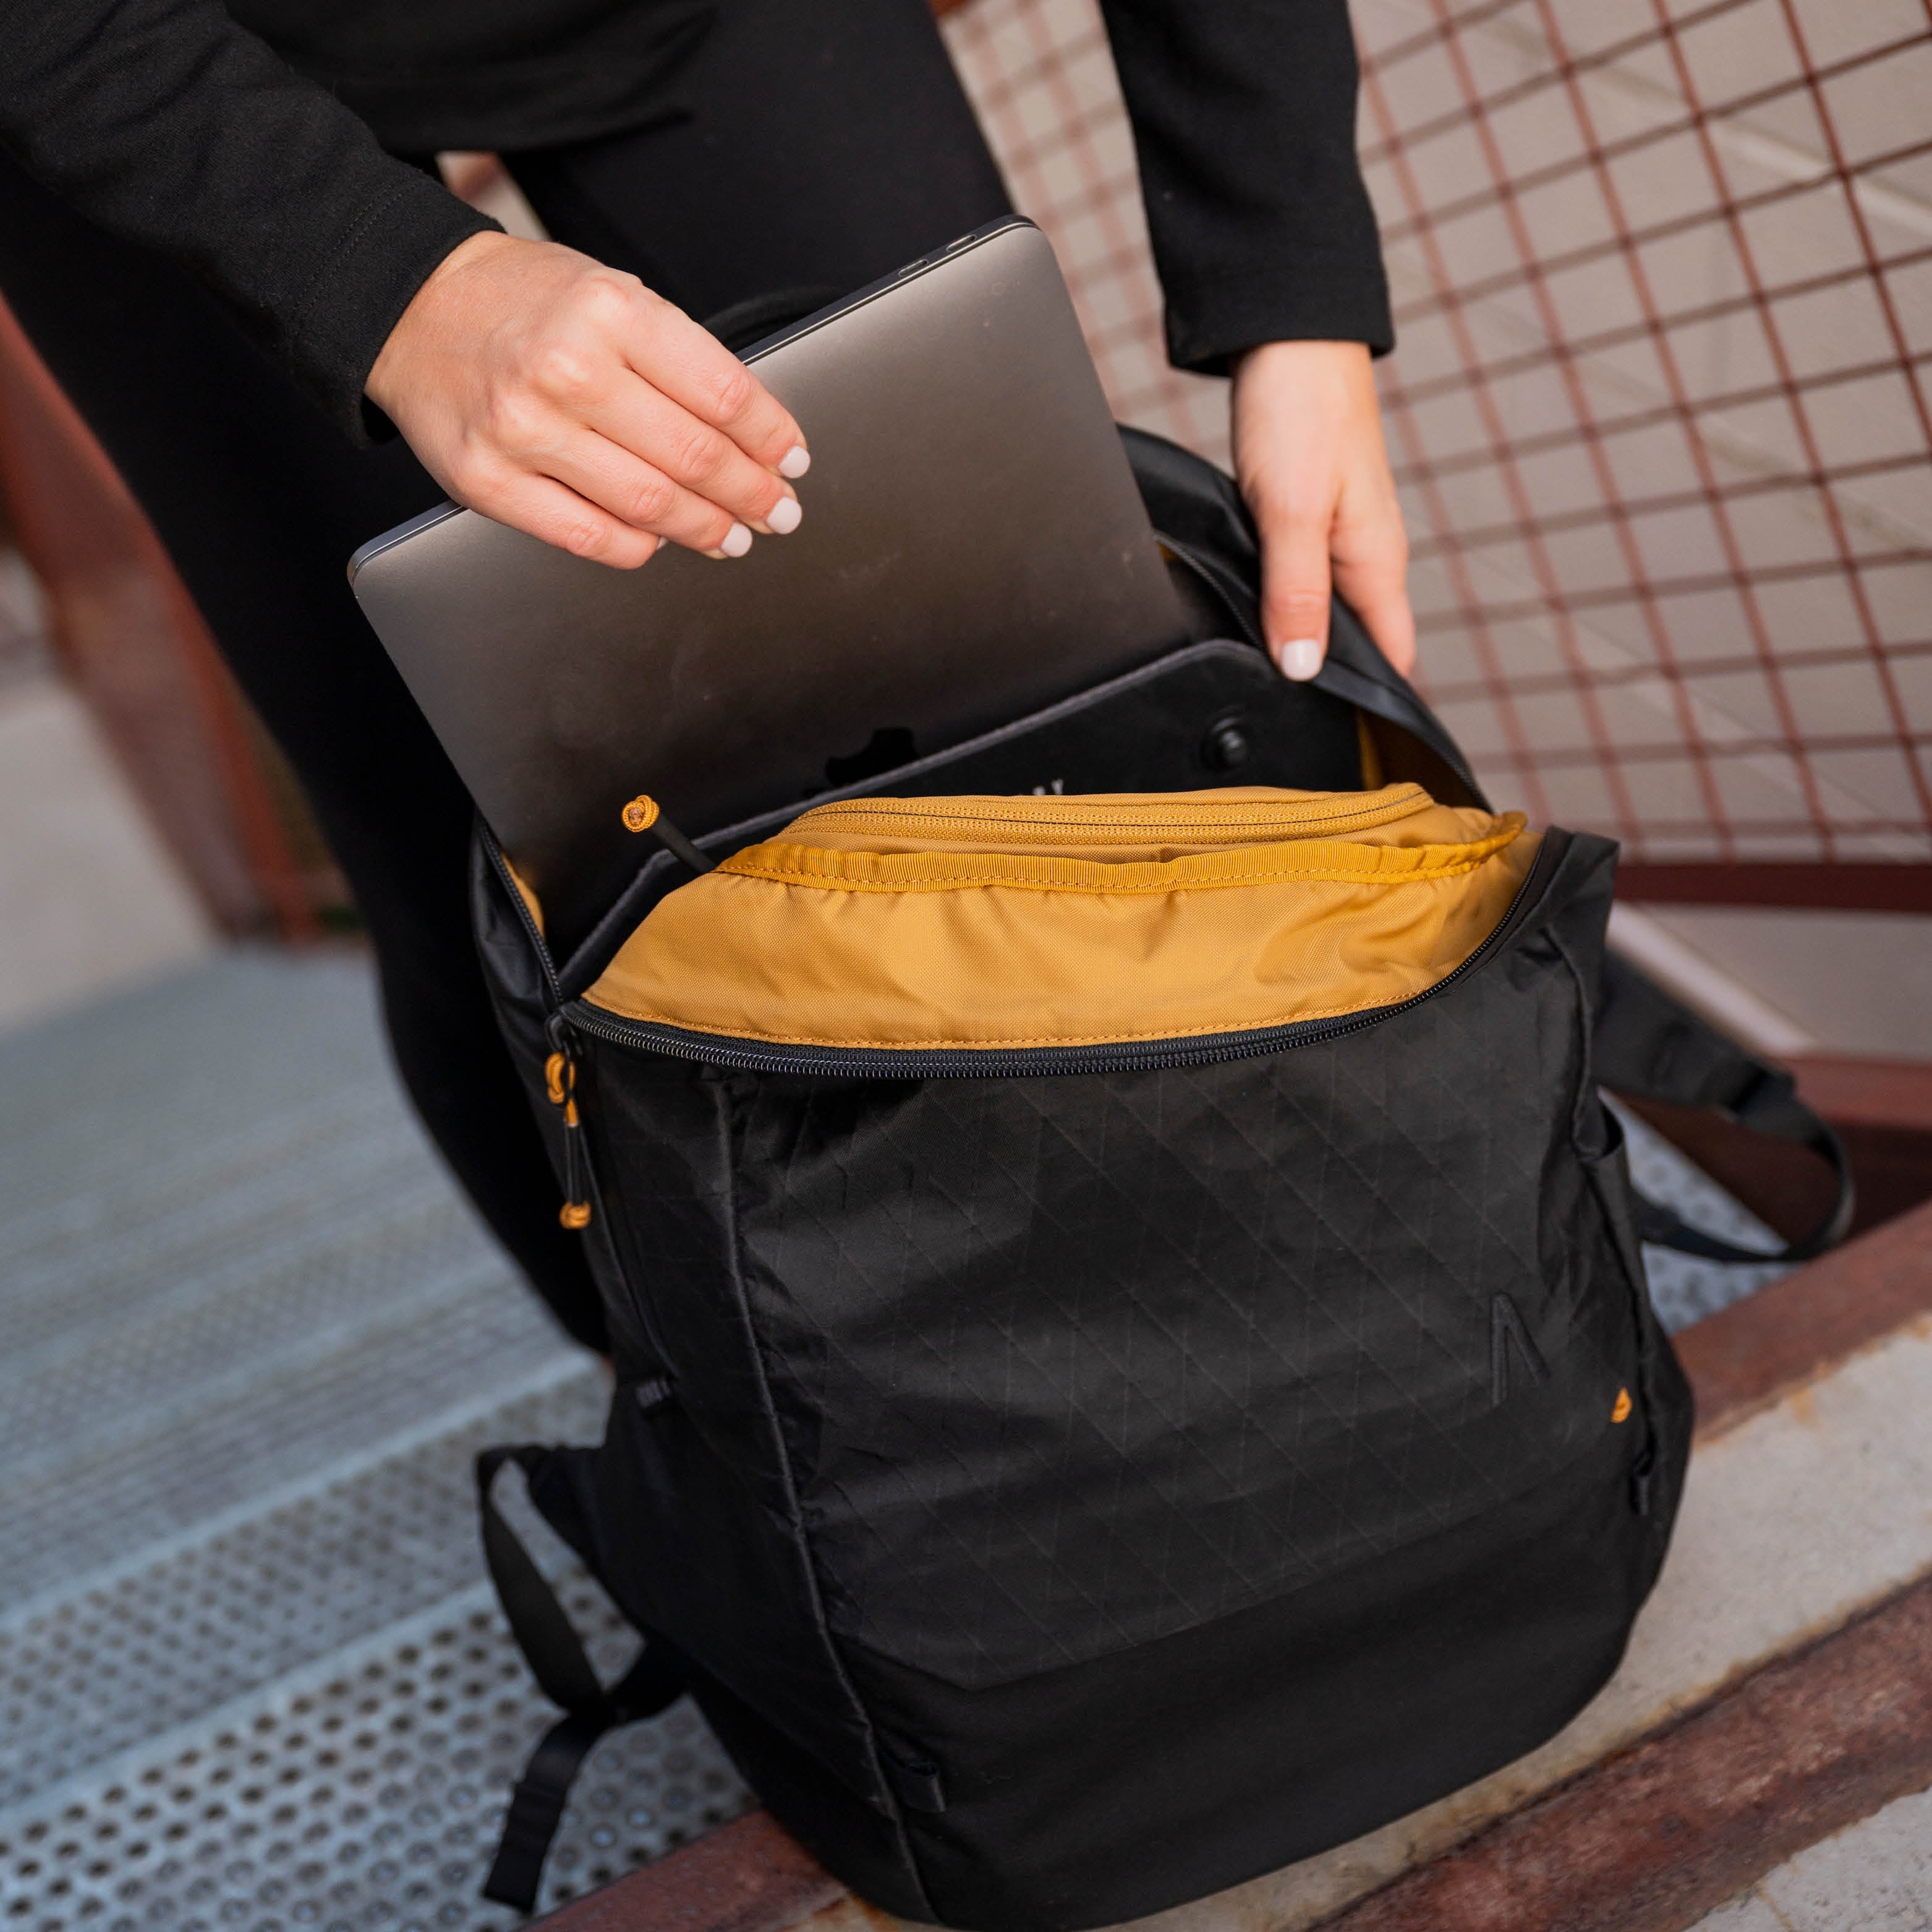 A woman inserts a laptop into her Rennen X-Pac Daypack.